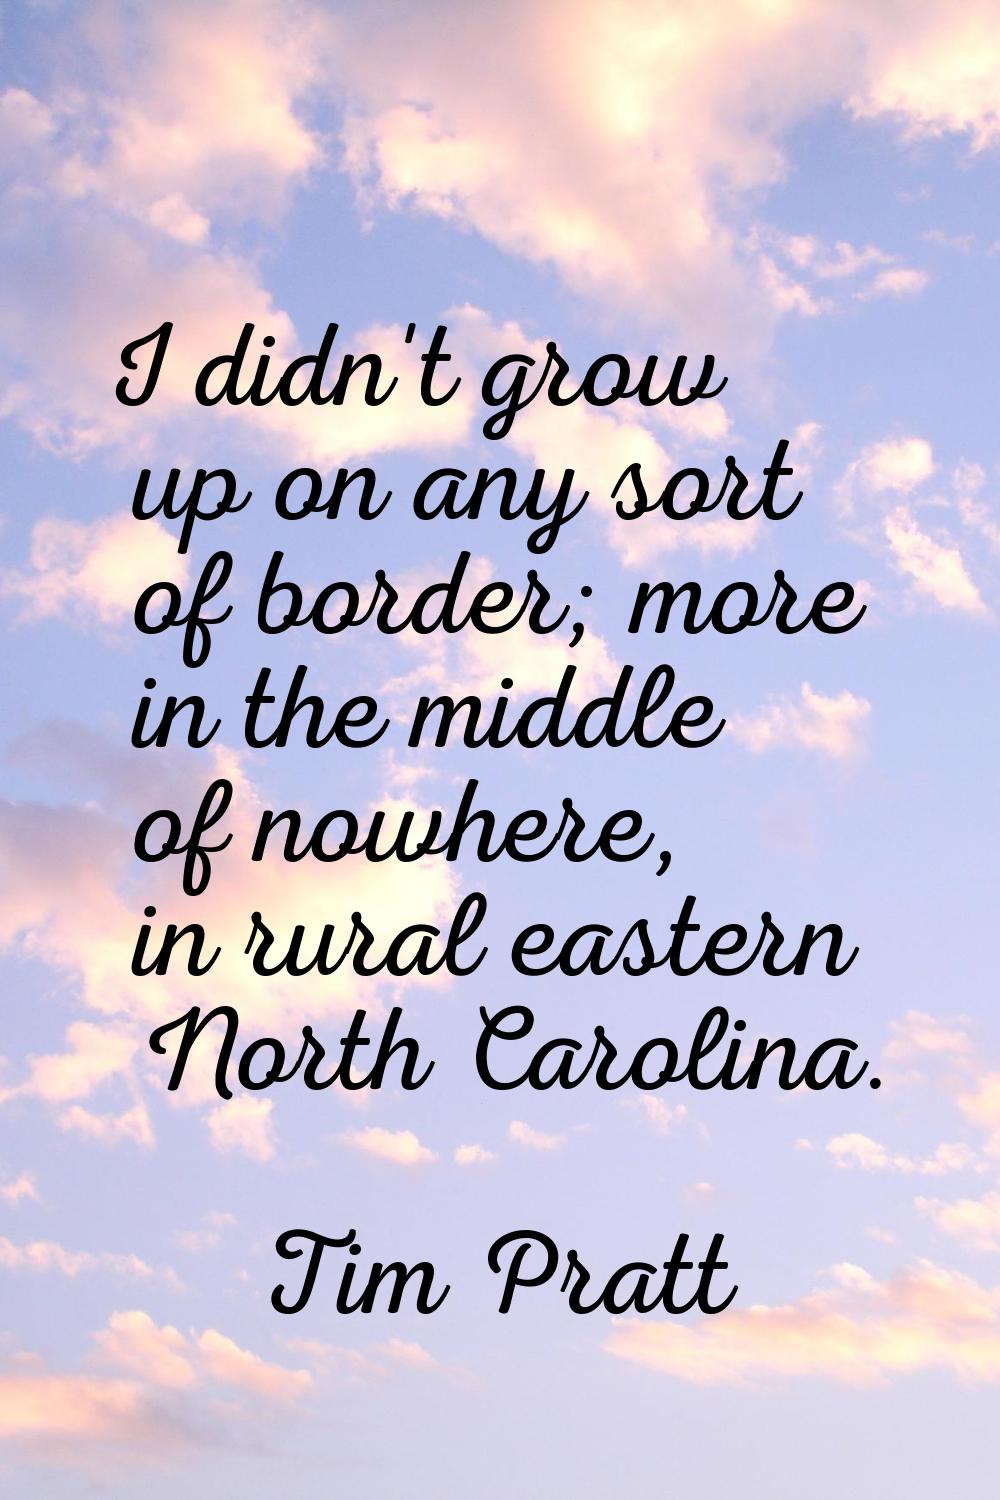 I didn't grow up on any sort of border; more in the middle of nowhere, in rural eastern North Carol